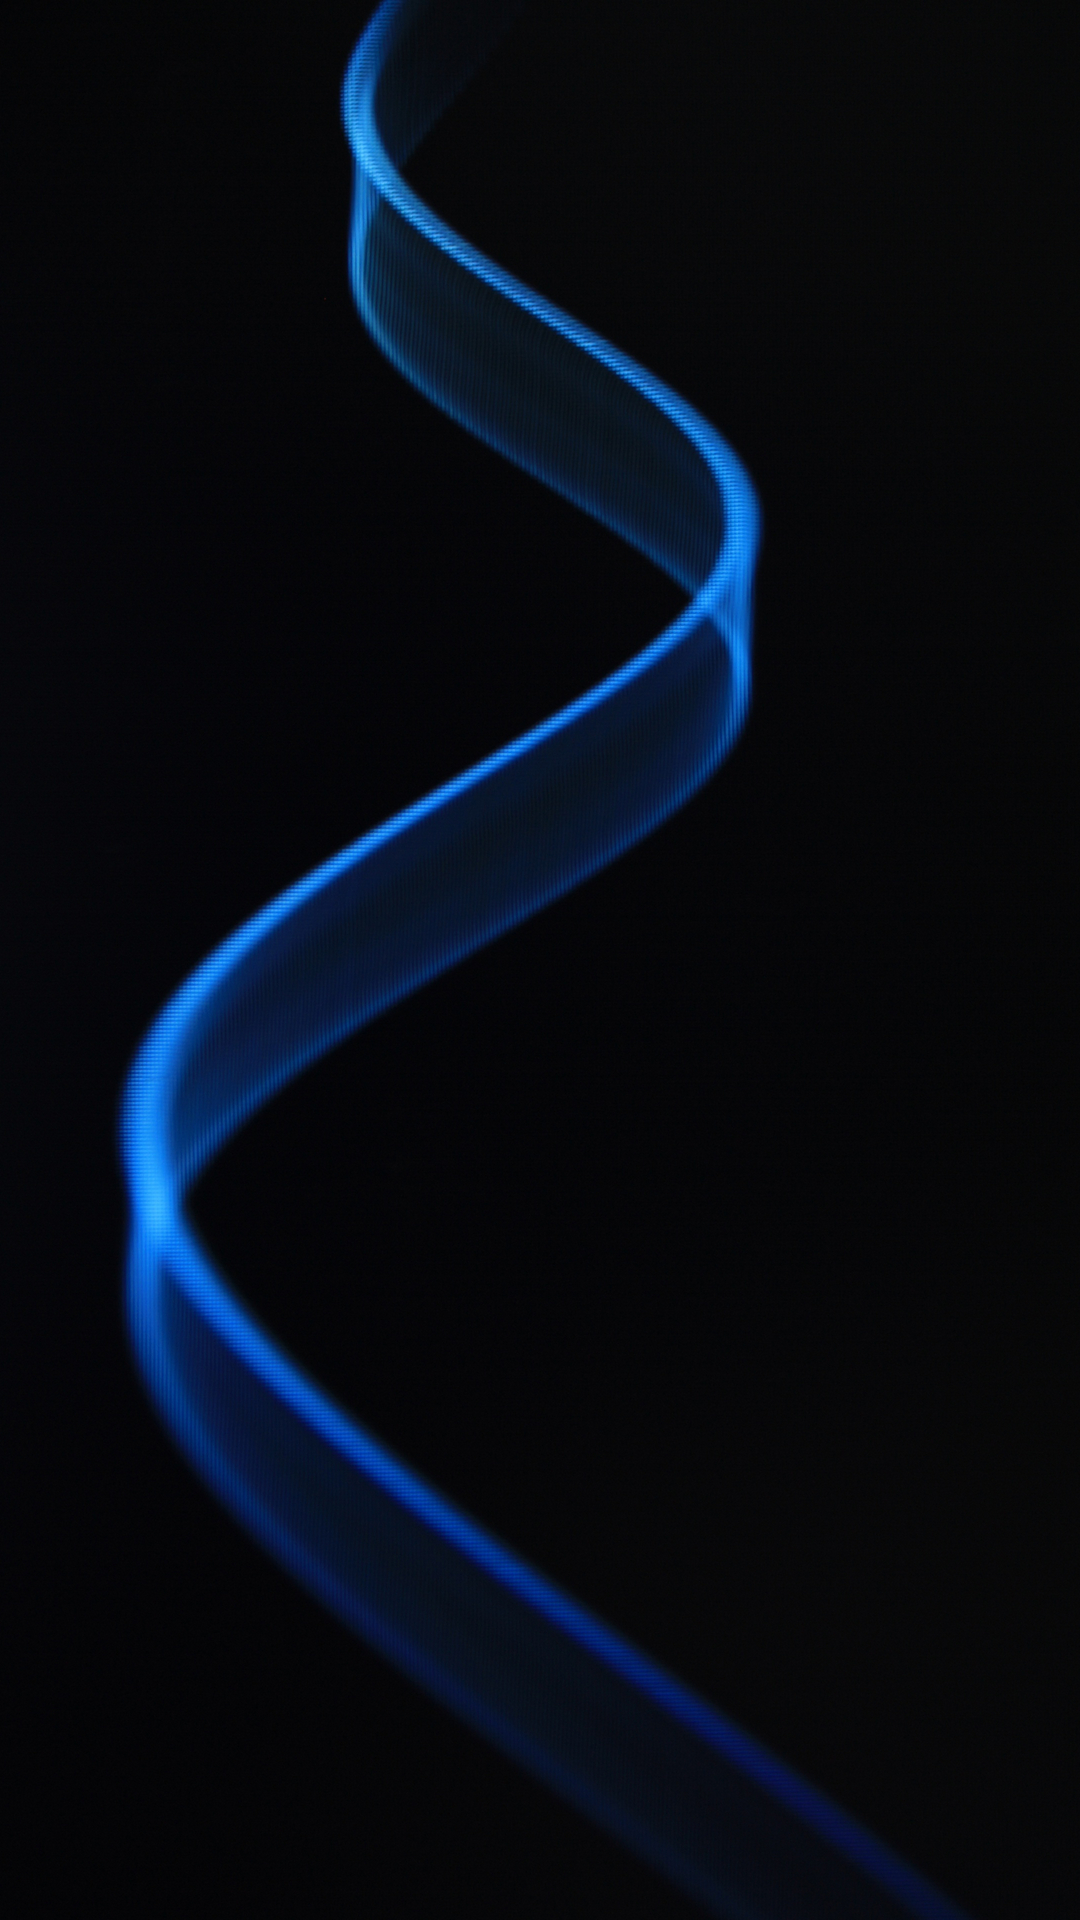 Background With Blue Design On Black For Galaxy S4 In